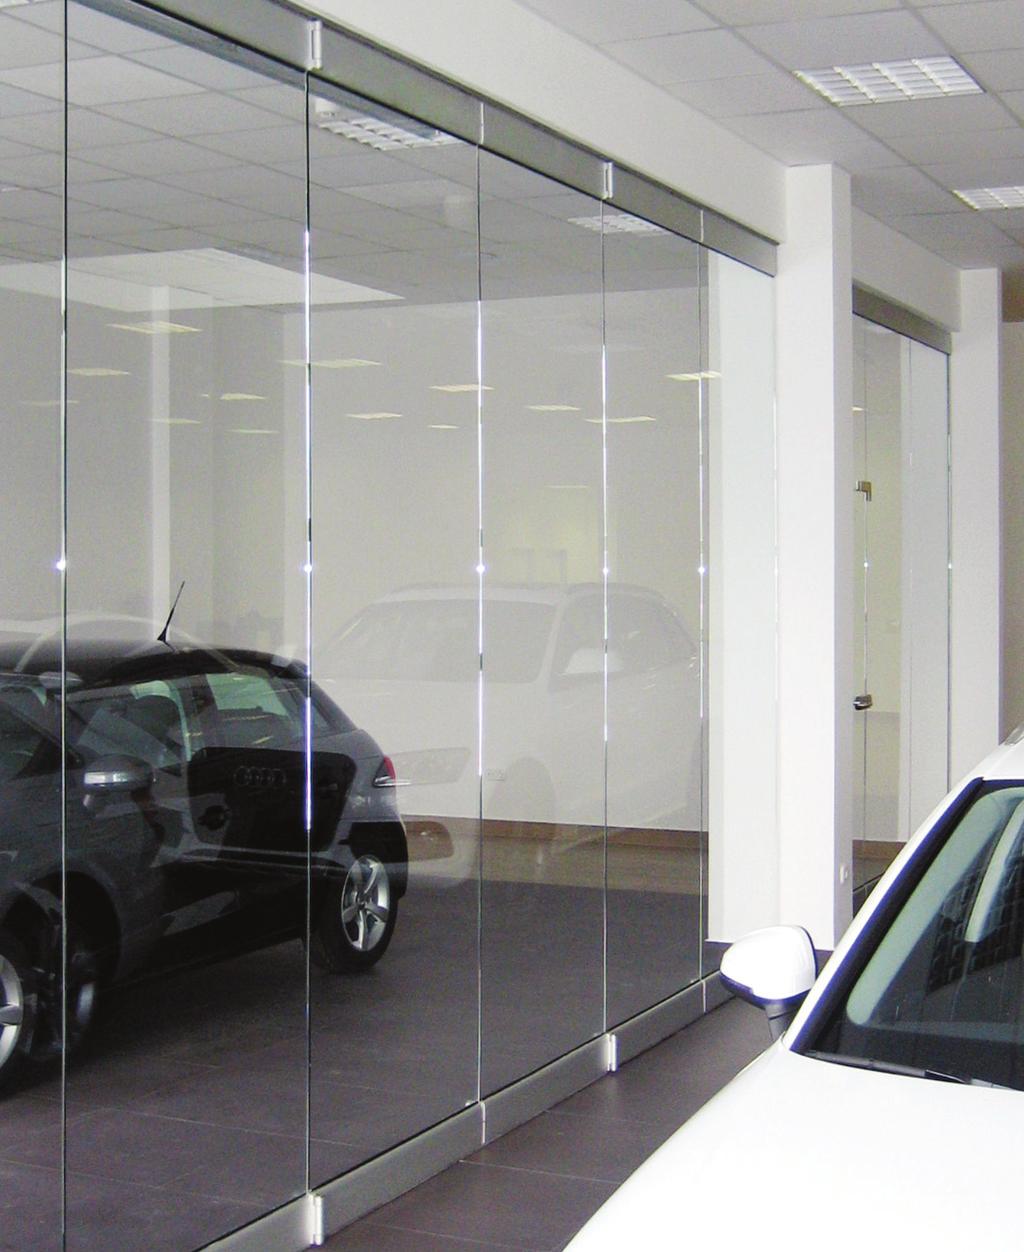 Slide Clear Frameless Moving Wall FN-M200 Middle folding system Slide Clear Frameless Movable Glass System, with hinges, heavy duty aluminum rail, exclusive embedded stainless steel rod and durable